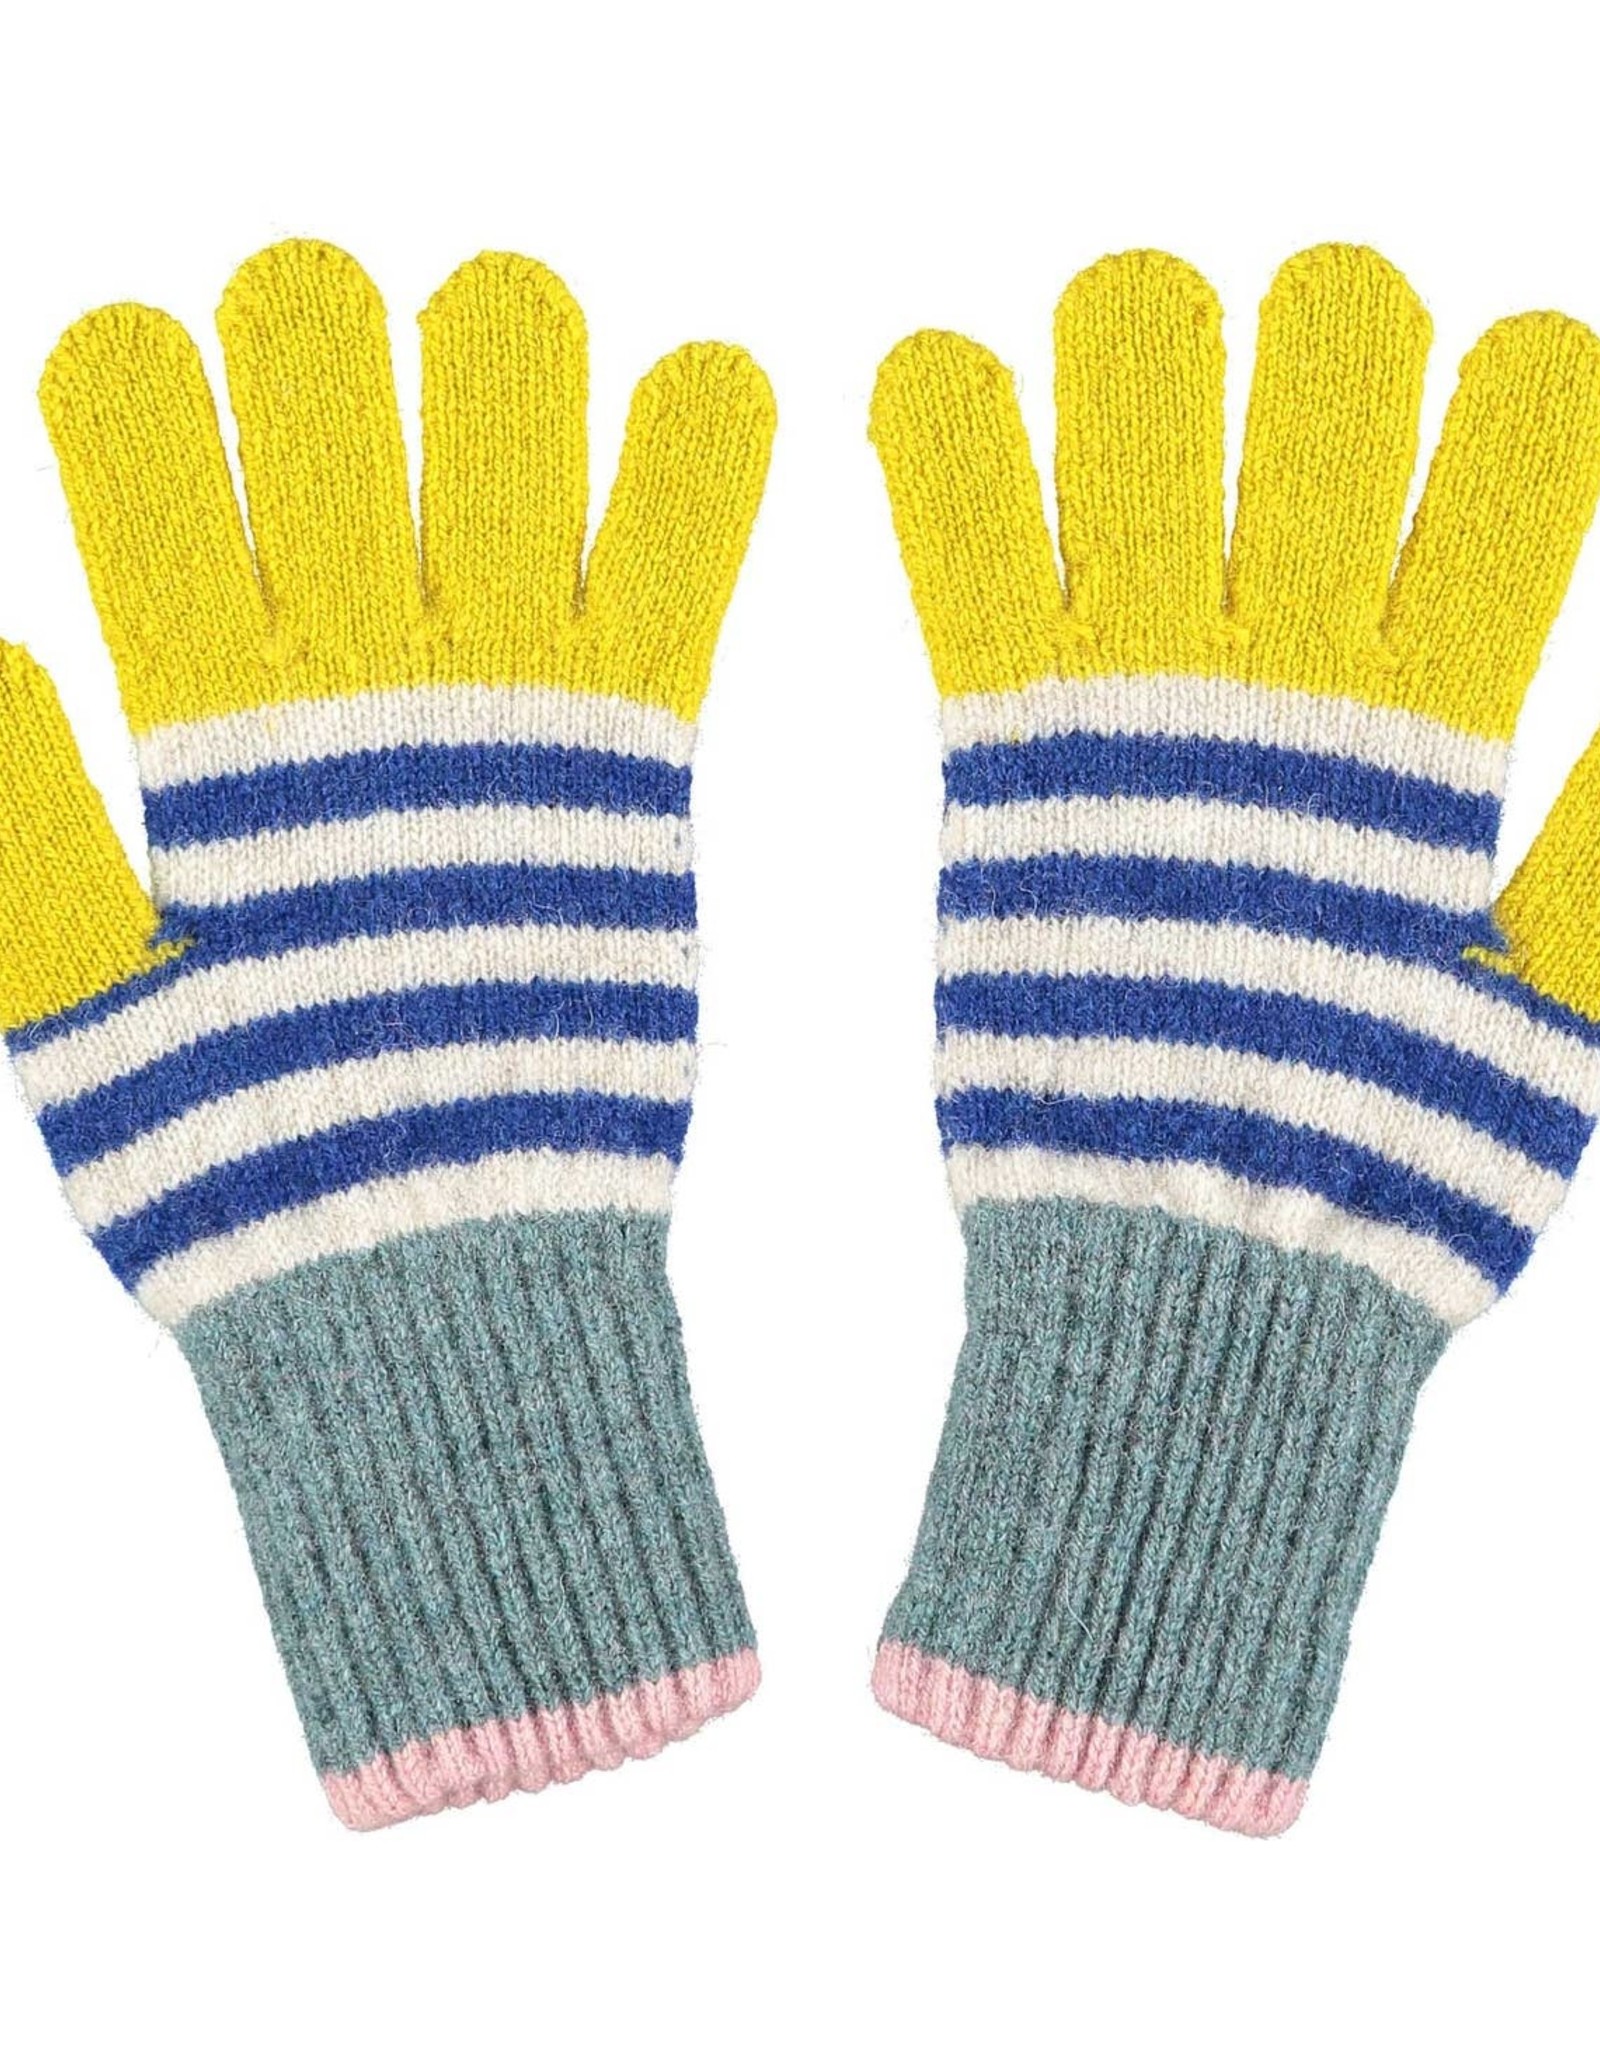 Catherine Tough - Kids' Lambswool Gloves (5-8) - Assorted